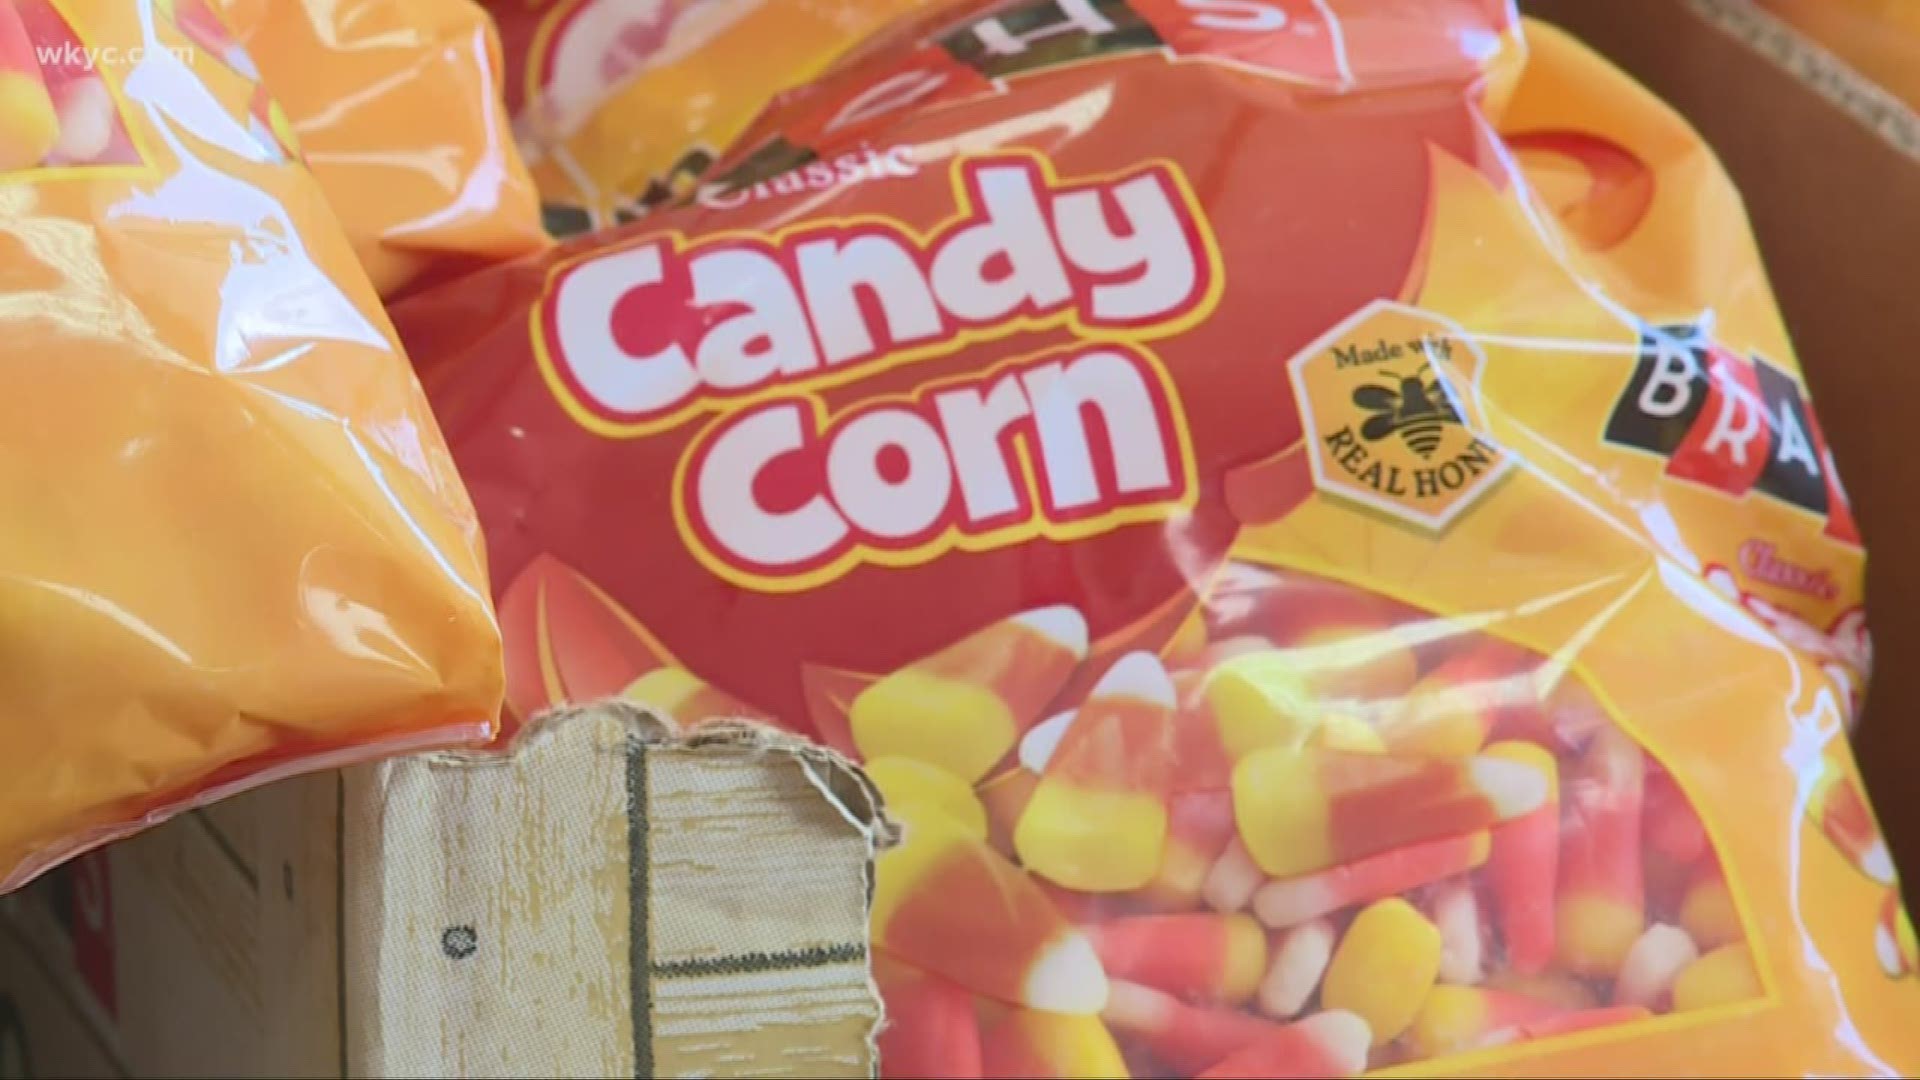 October 2019: Yum or yuck? Candy corn has divided the nation. The sugary treat has evolved, though with plenty of new unique flavors like blackberry cobbler.